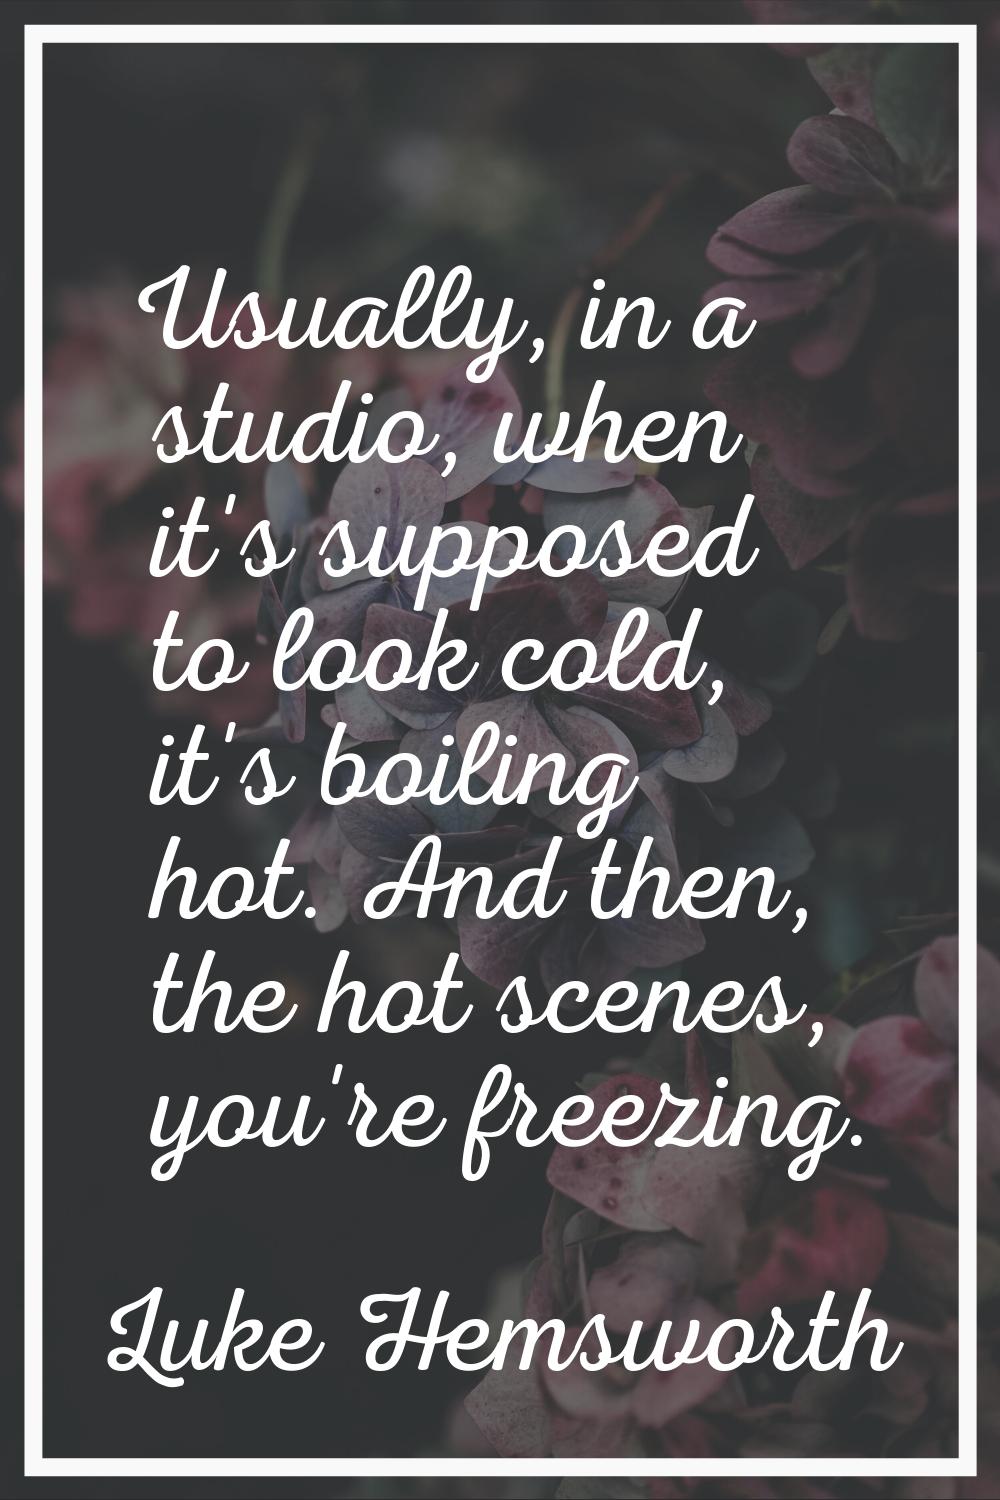 Usually, in a studio, when it's supposed to look cold, it's boiling hot. And then, the hot scenes, 